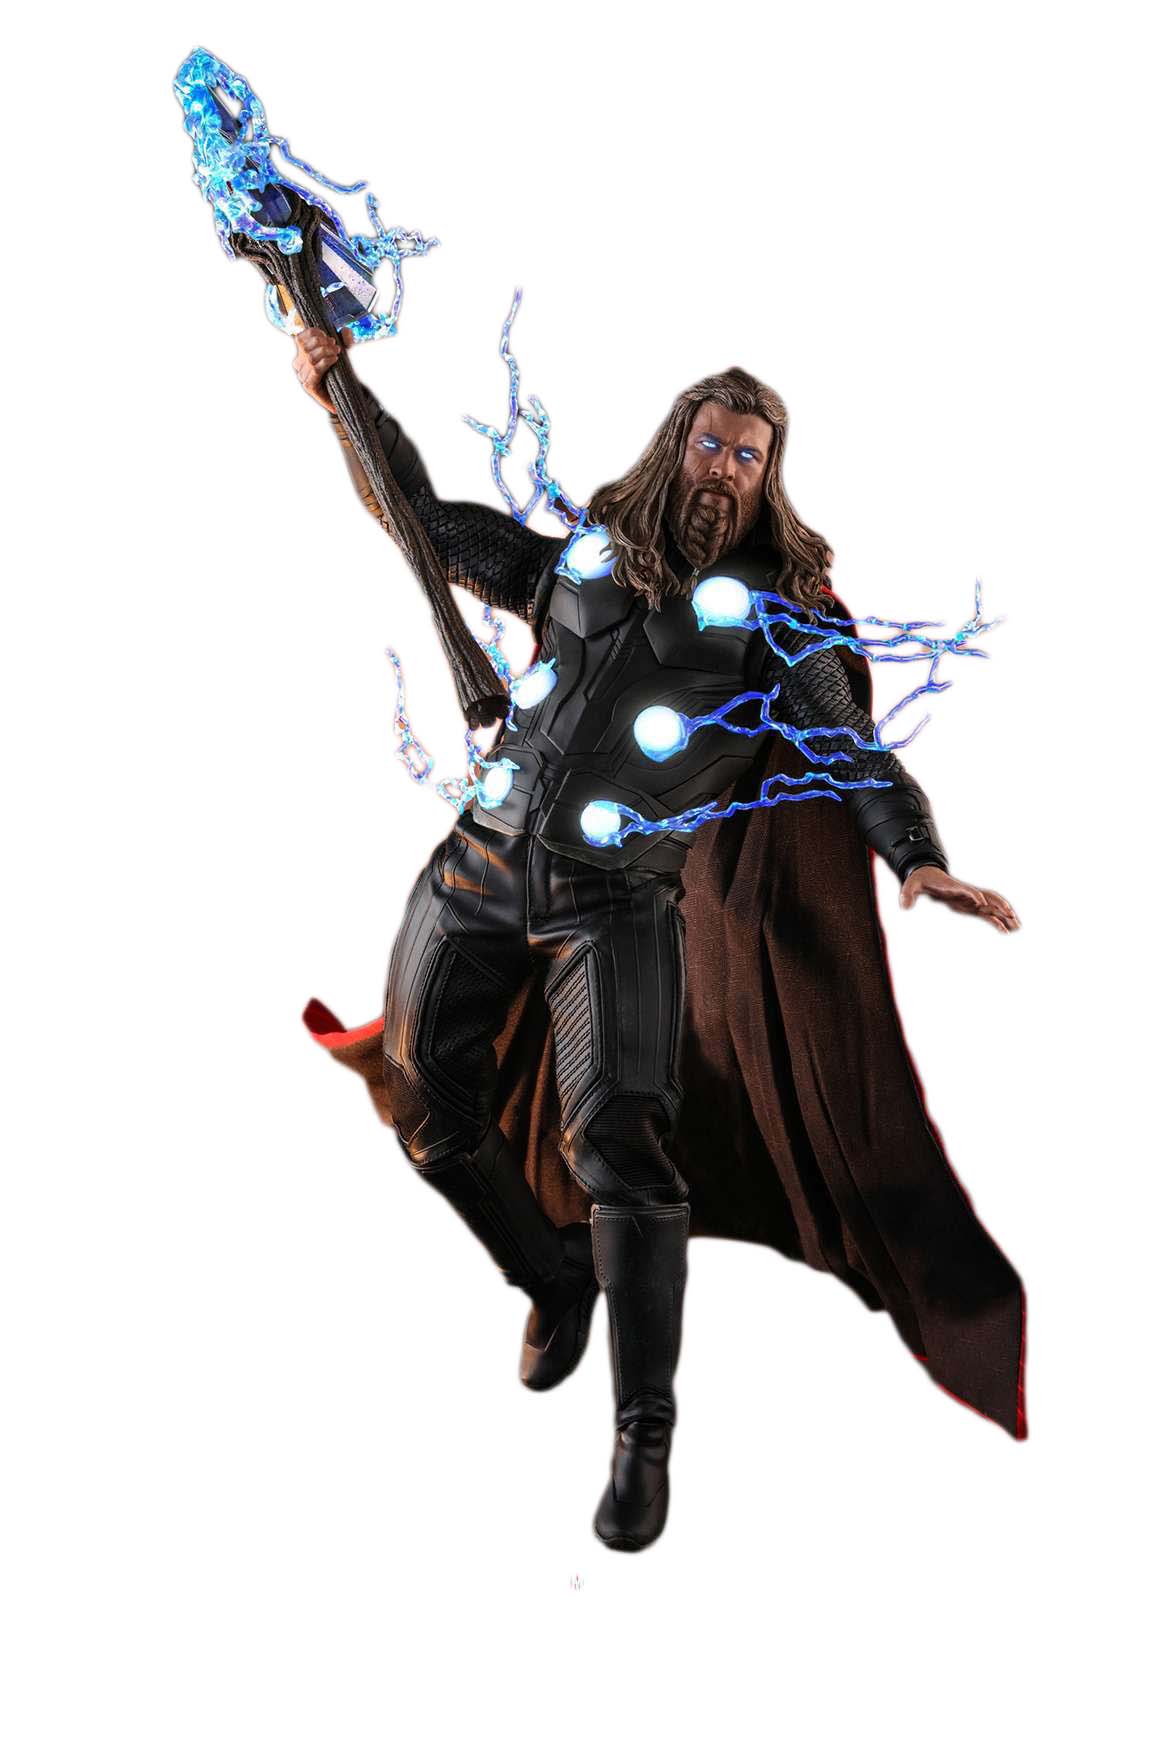 Hot Toys Marvel Avengers Endgame Thor Collectible Figure